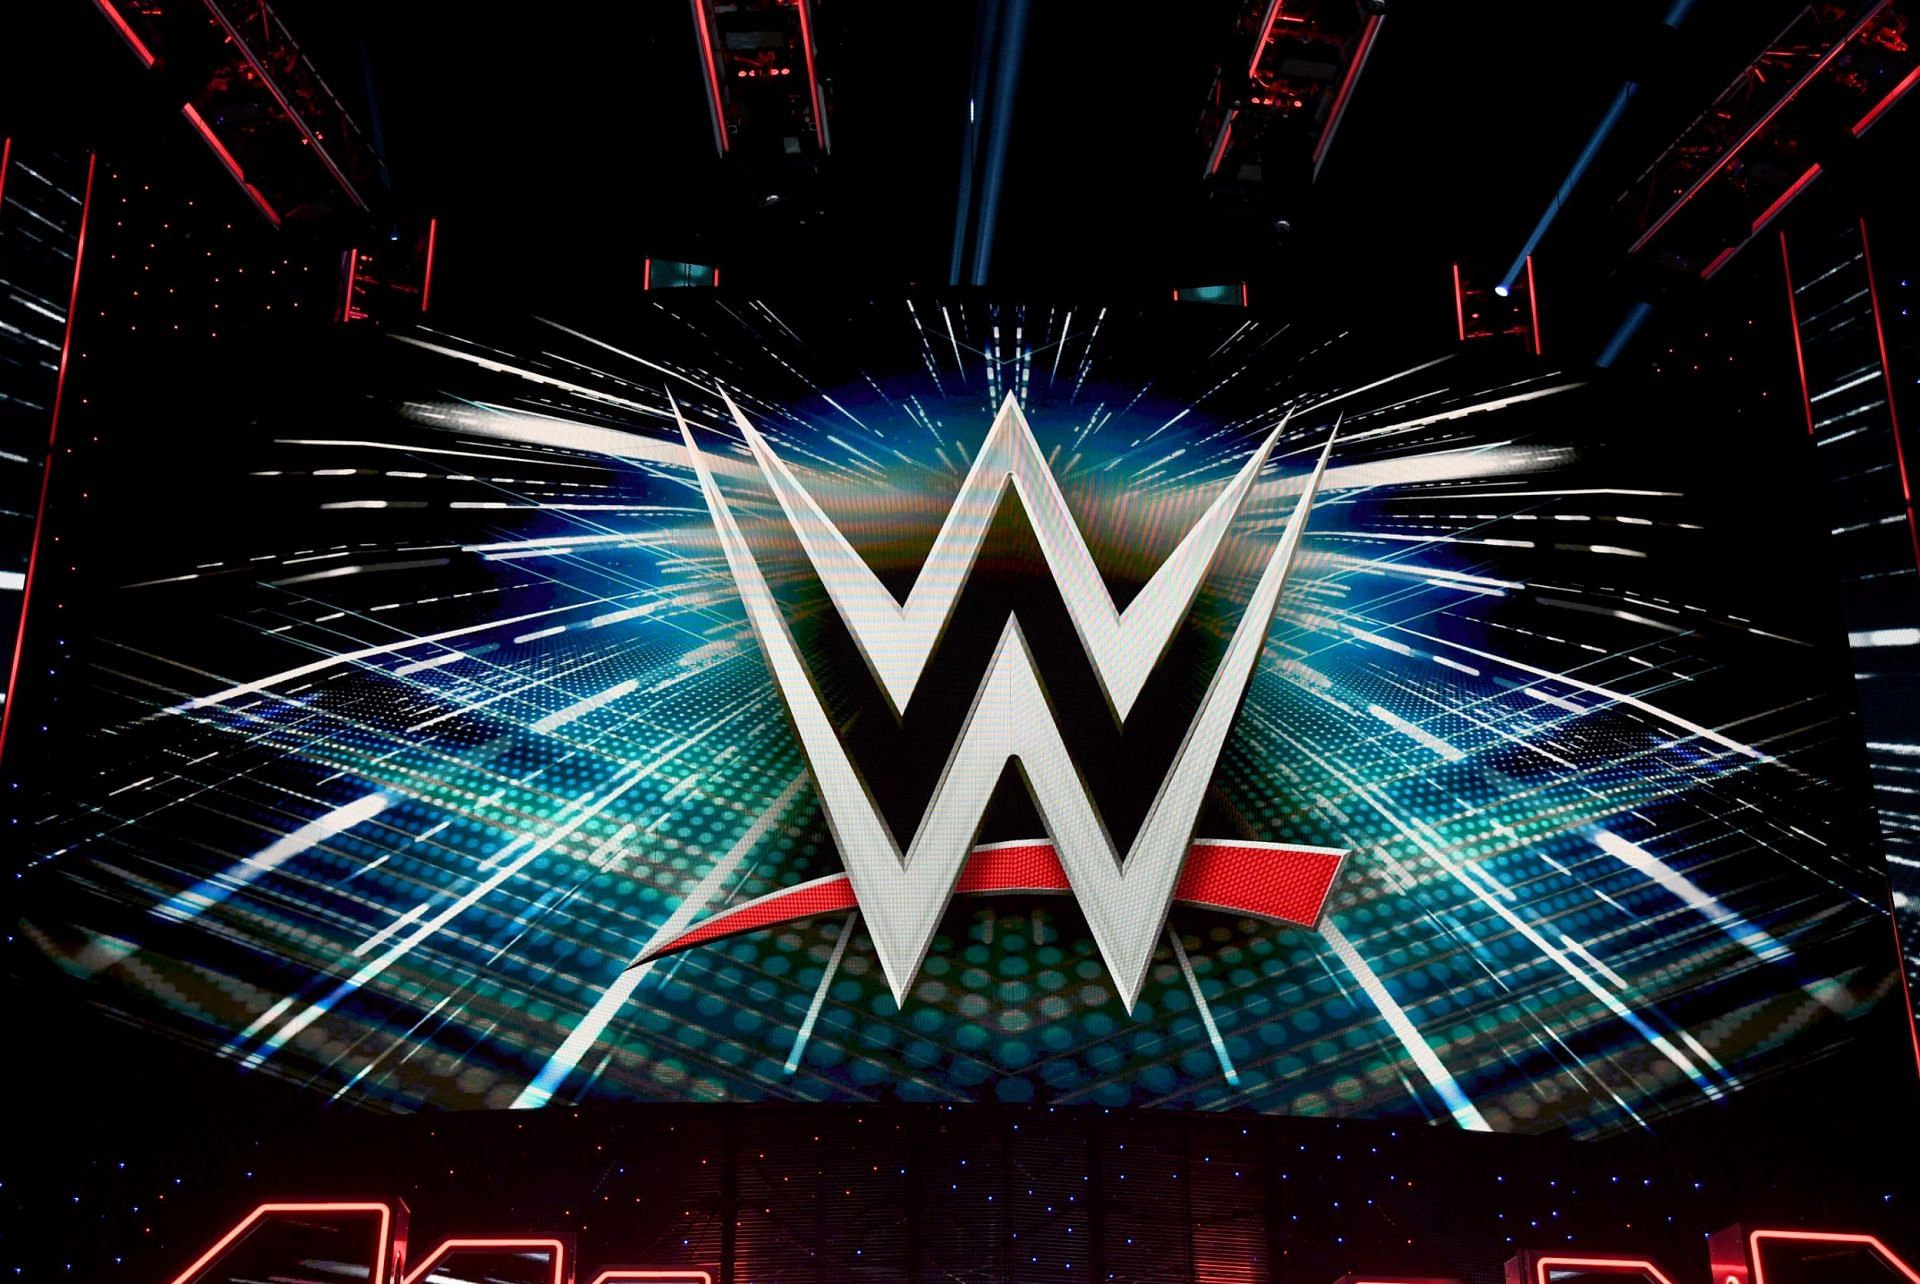 WWE Logo used during the current PG era